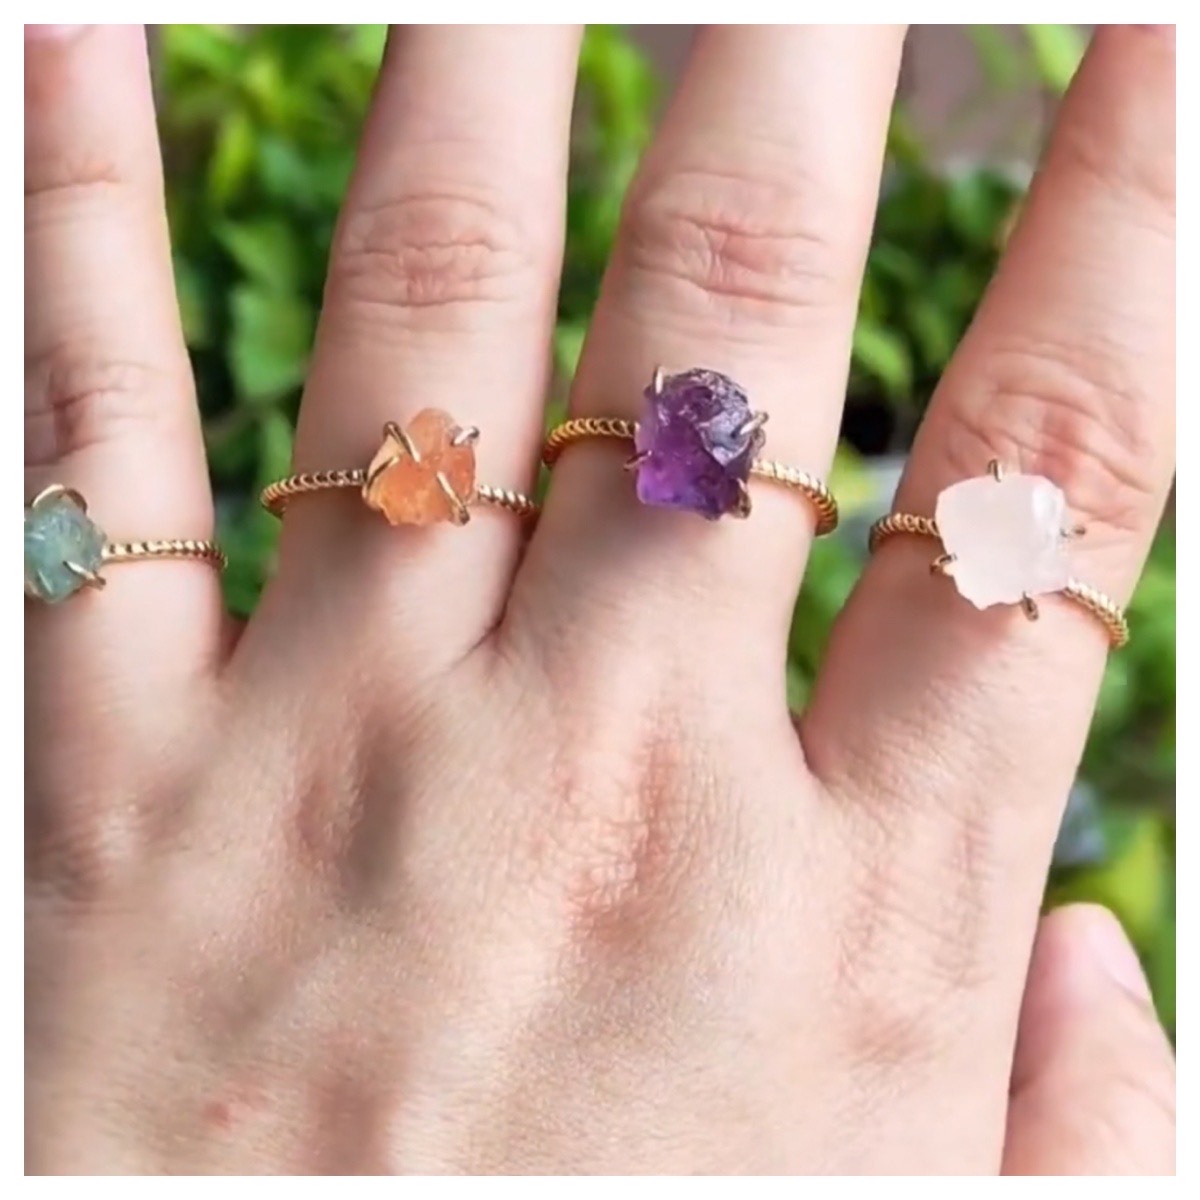 Geometric Cluster Ring Gemstone With Rose Quartz Healing Crystal In Purple,  Blue, And Green Natural Stone Jewelry Gift For Women From Euding, $15.52 |  DHgate.Com